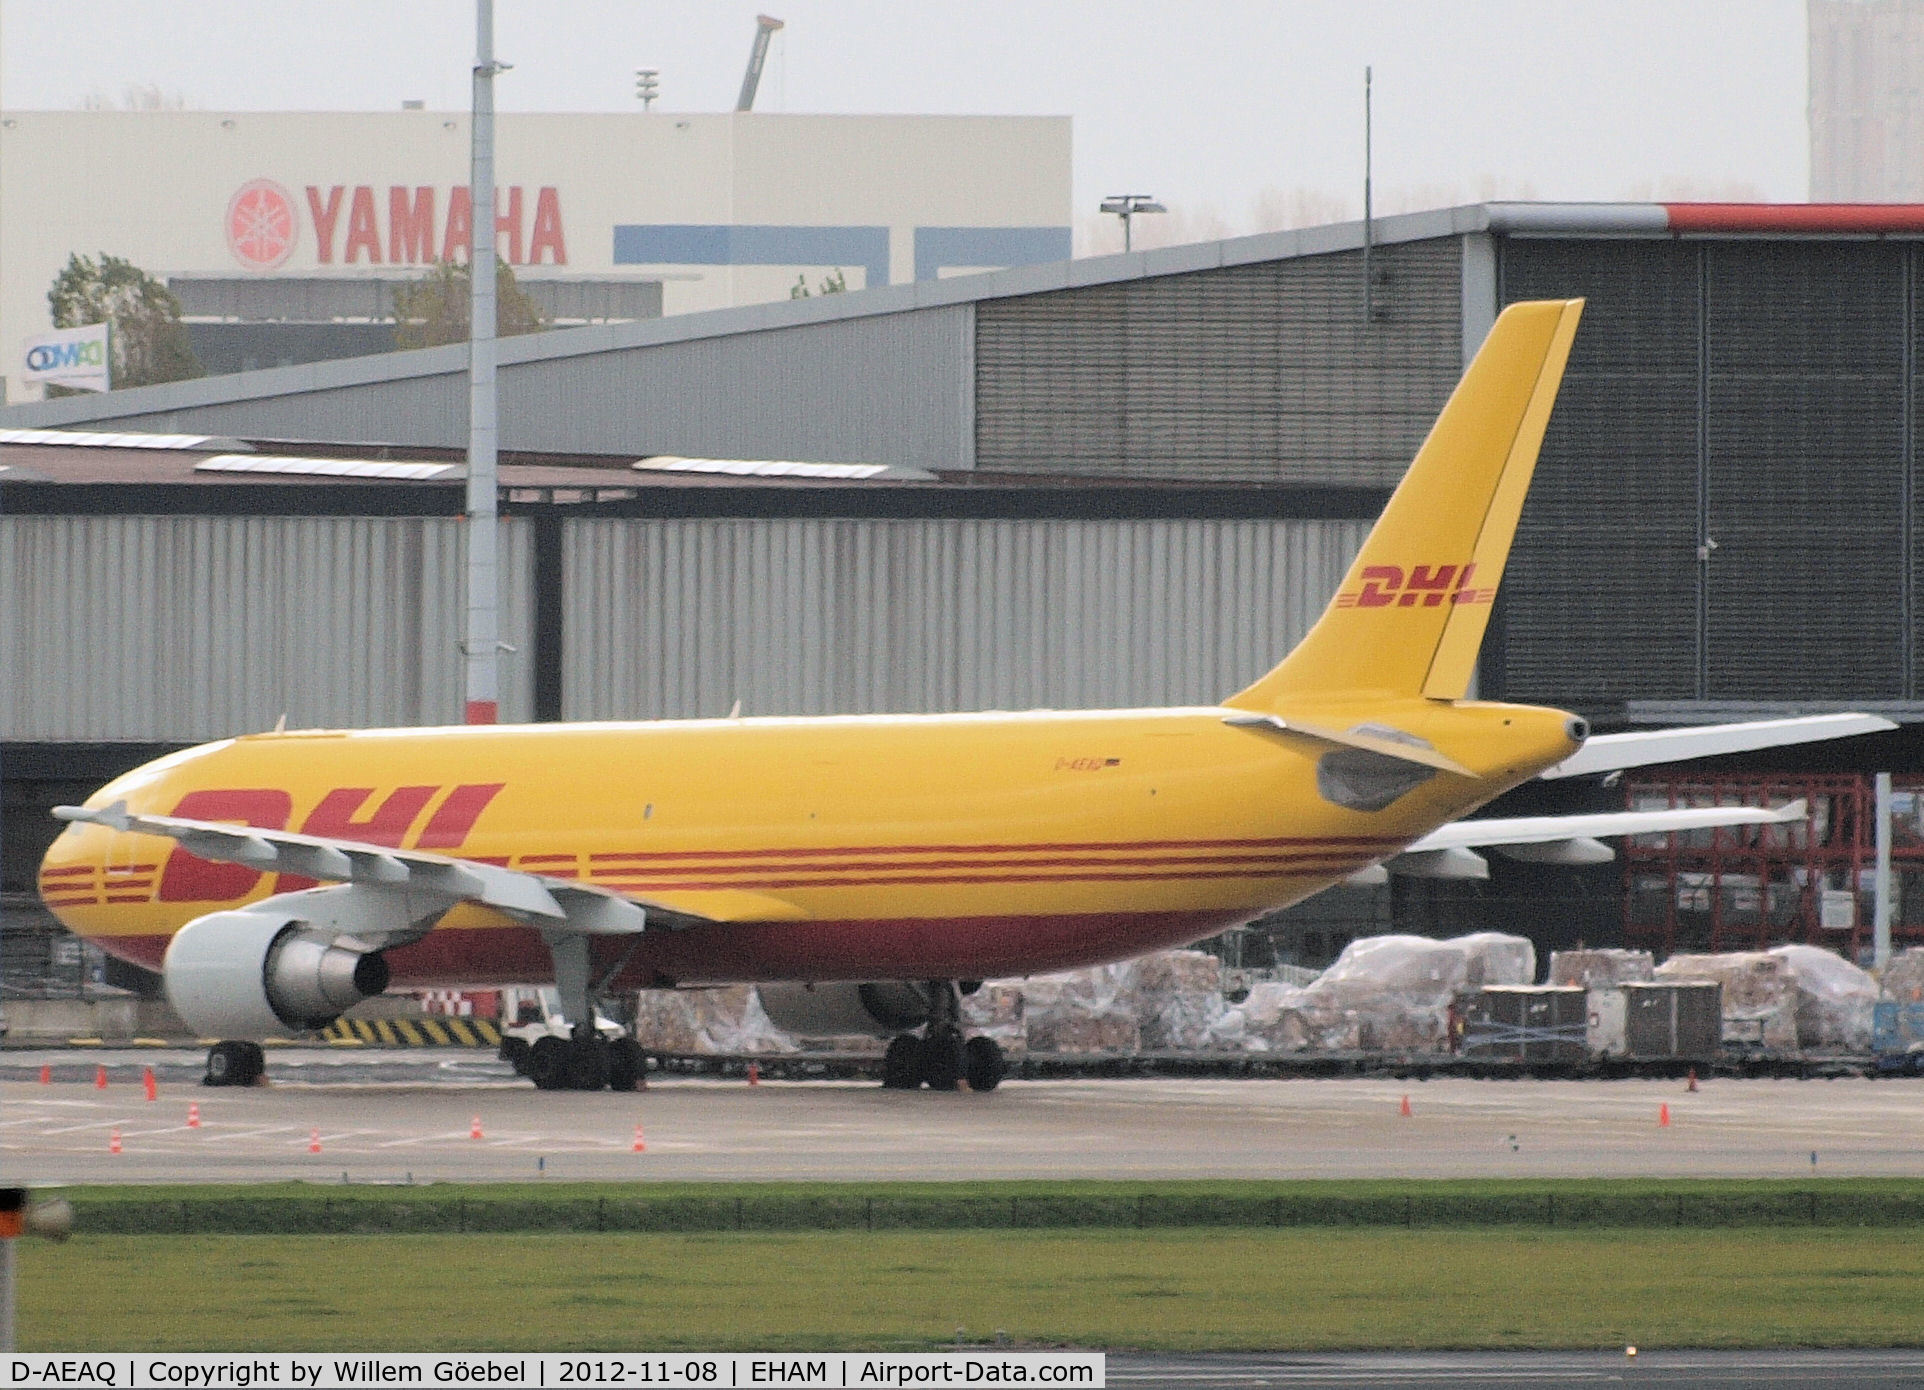 D-AEAQ, 1994 Airbus A300B4-622R(F) C/N 729, Parking on Schiphol Airport by the Cargo gate